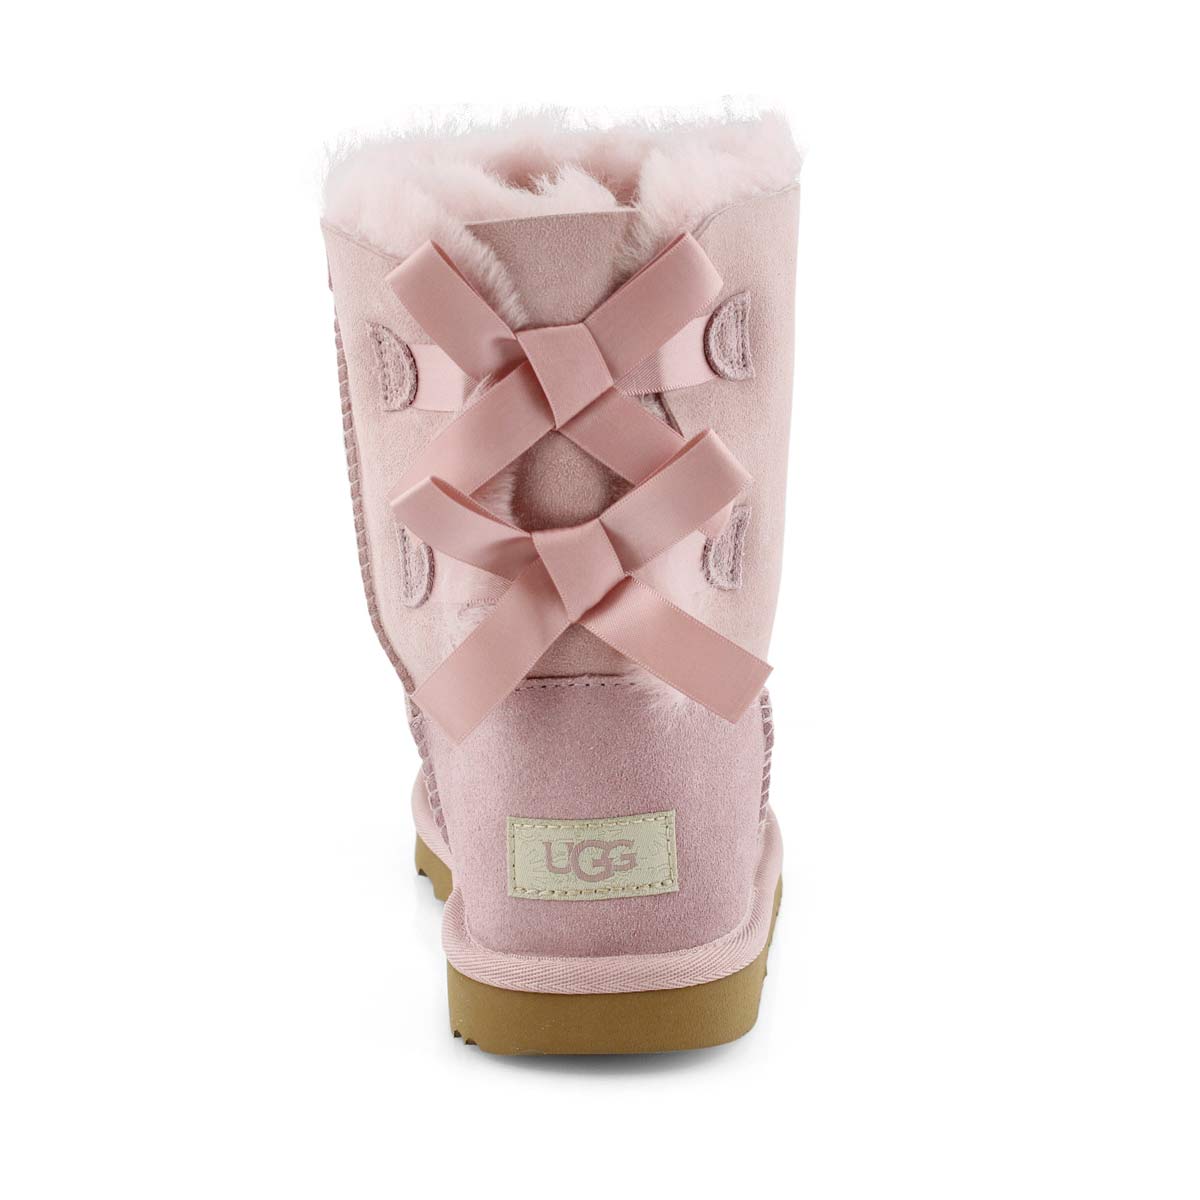 Bottes BAILEY BOW II cristal rose, filles